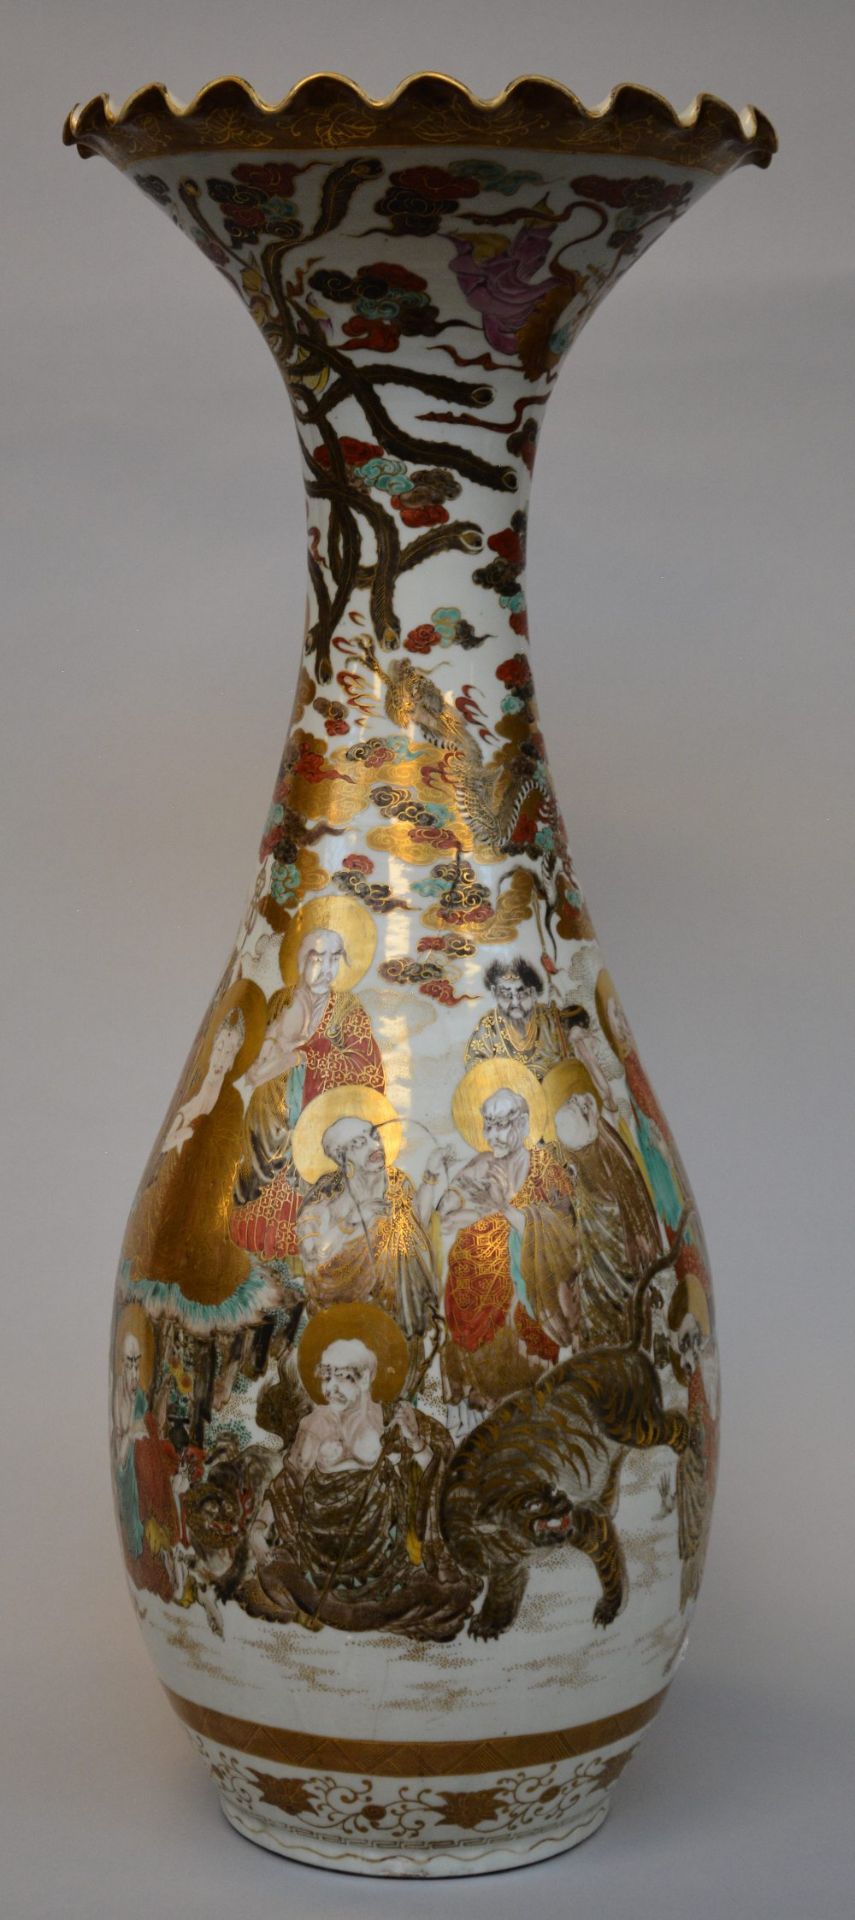 An exceptional Japanese vase with Satsuma decoration, 19thC, H 76,5 cm (several cracks) - Image 3 of 6